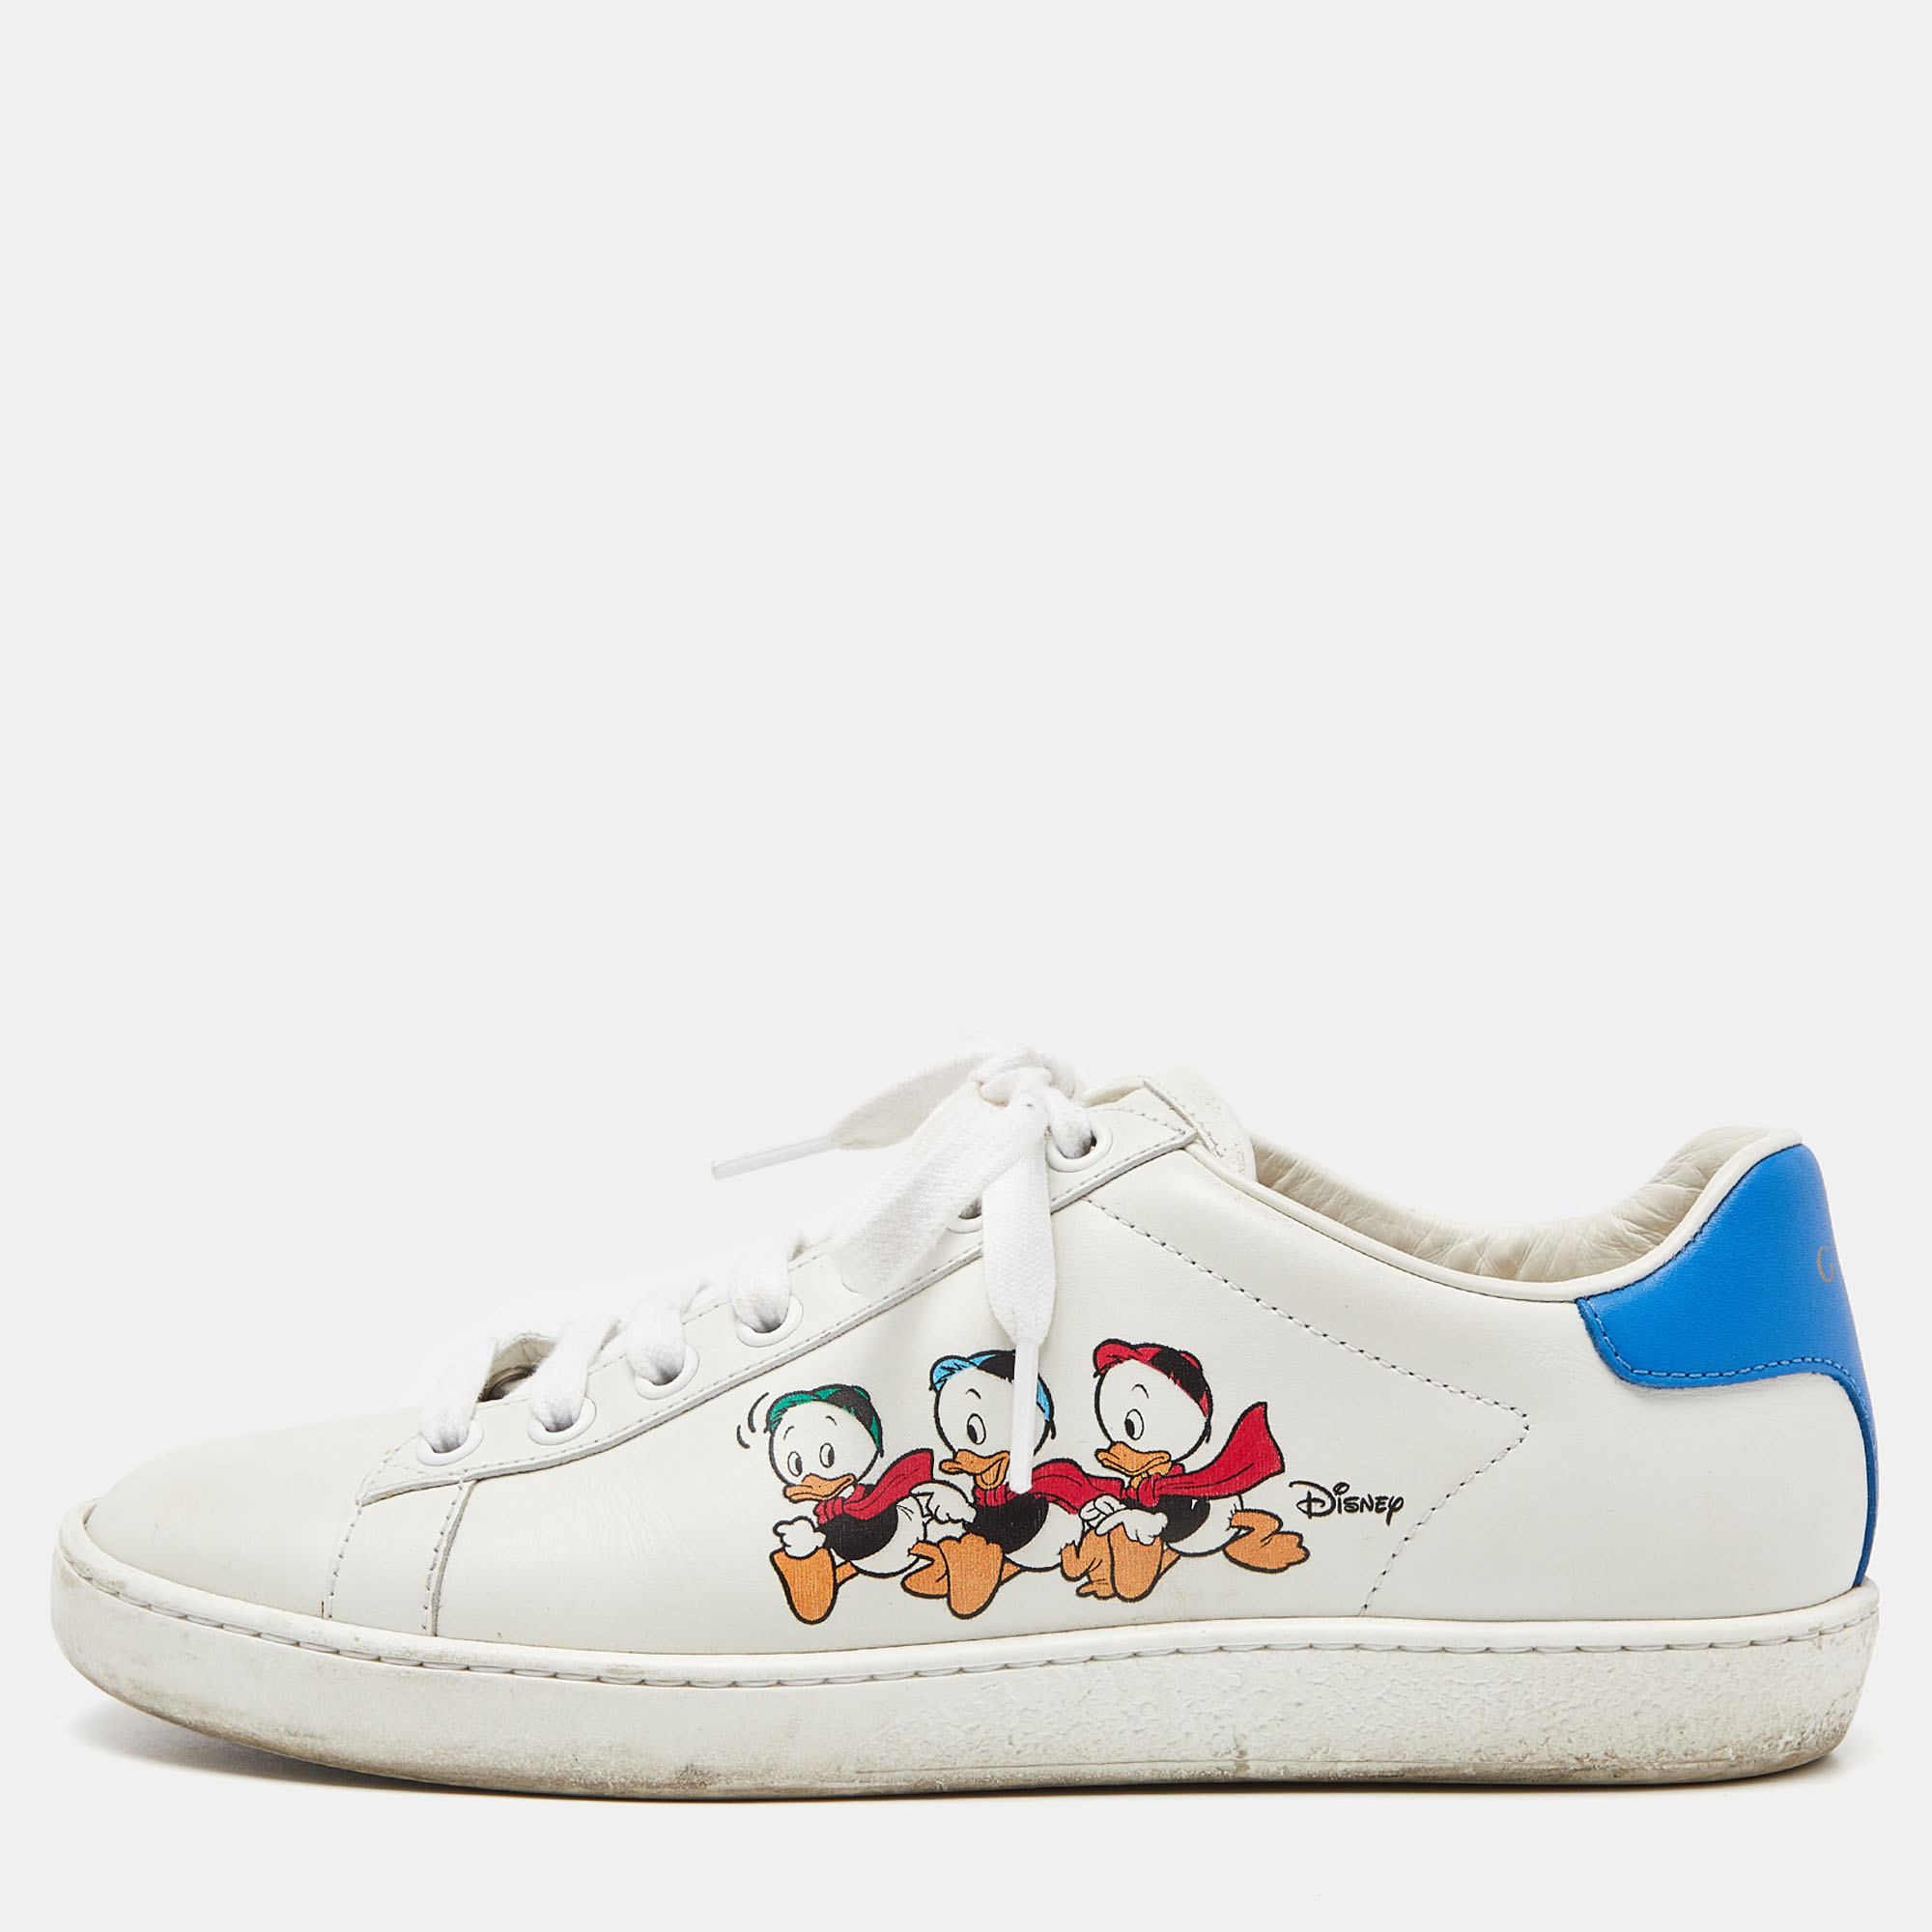 Give your outfit a luxe update with this pair of Gucci x Disney Ace sneakers. The shoes are sewn perfectly to help you make a statement in them for a long time.